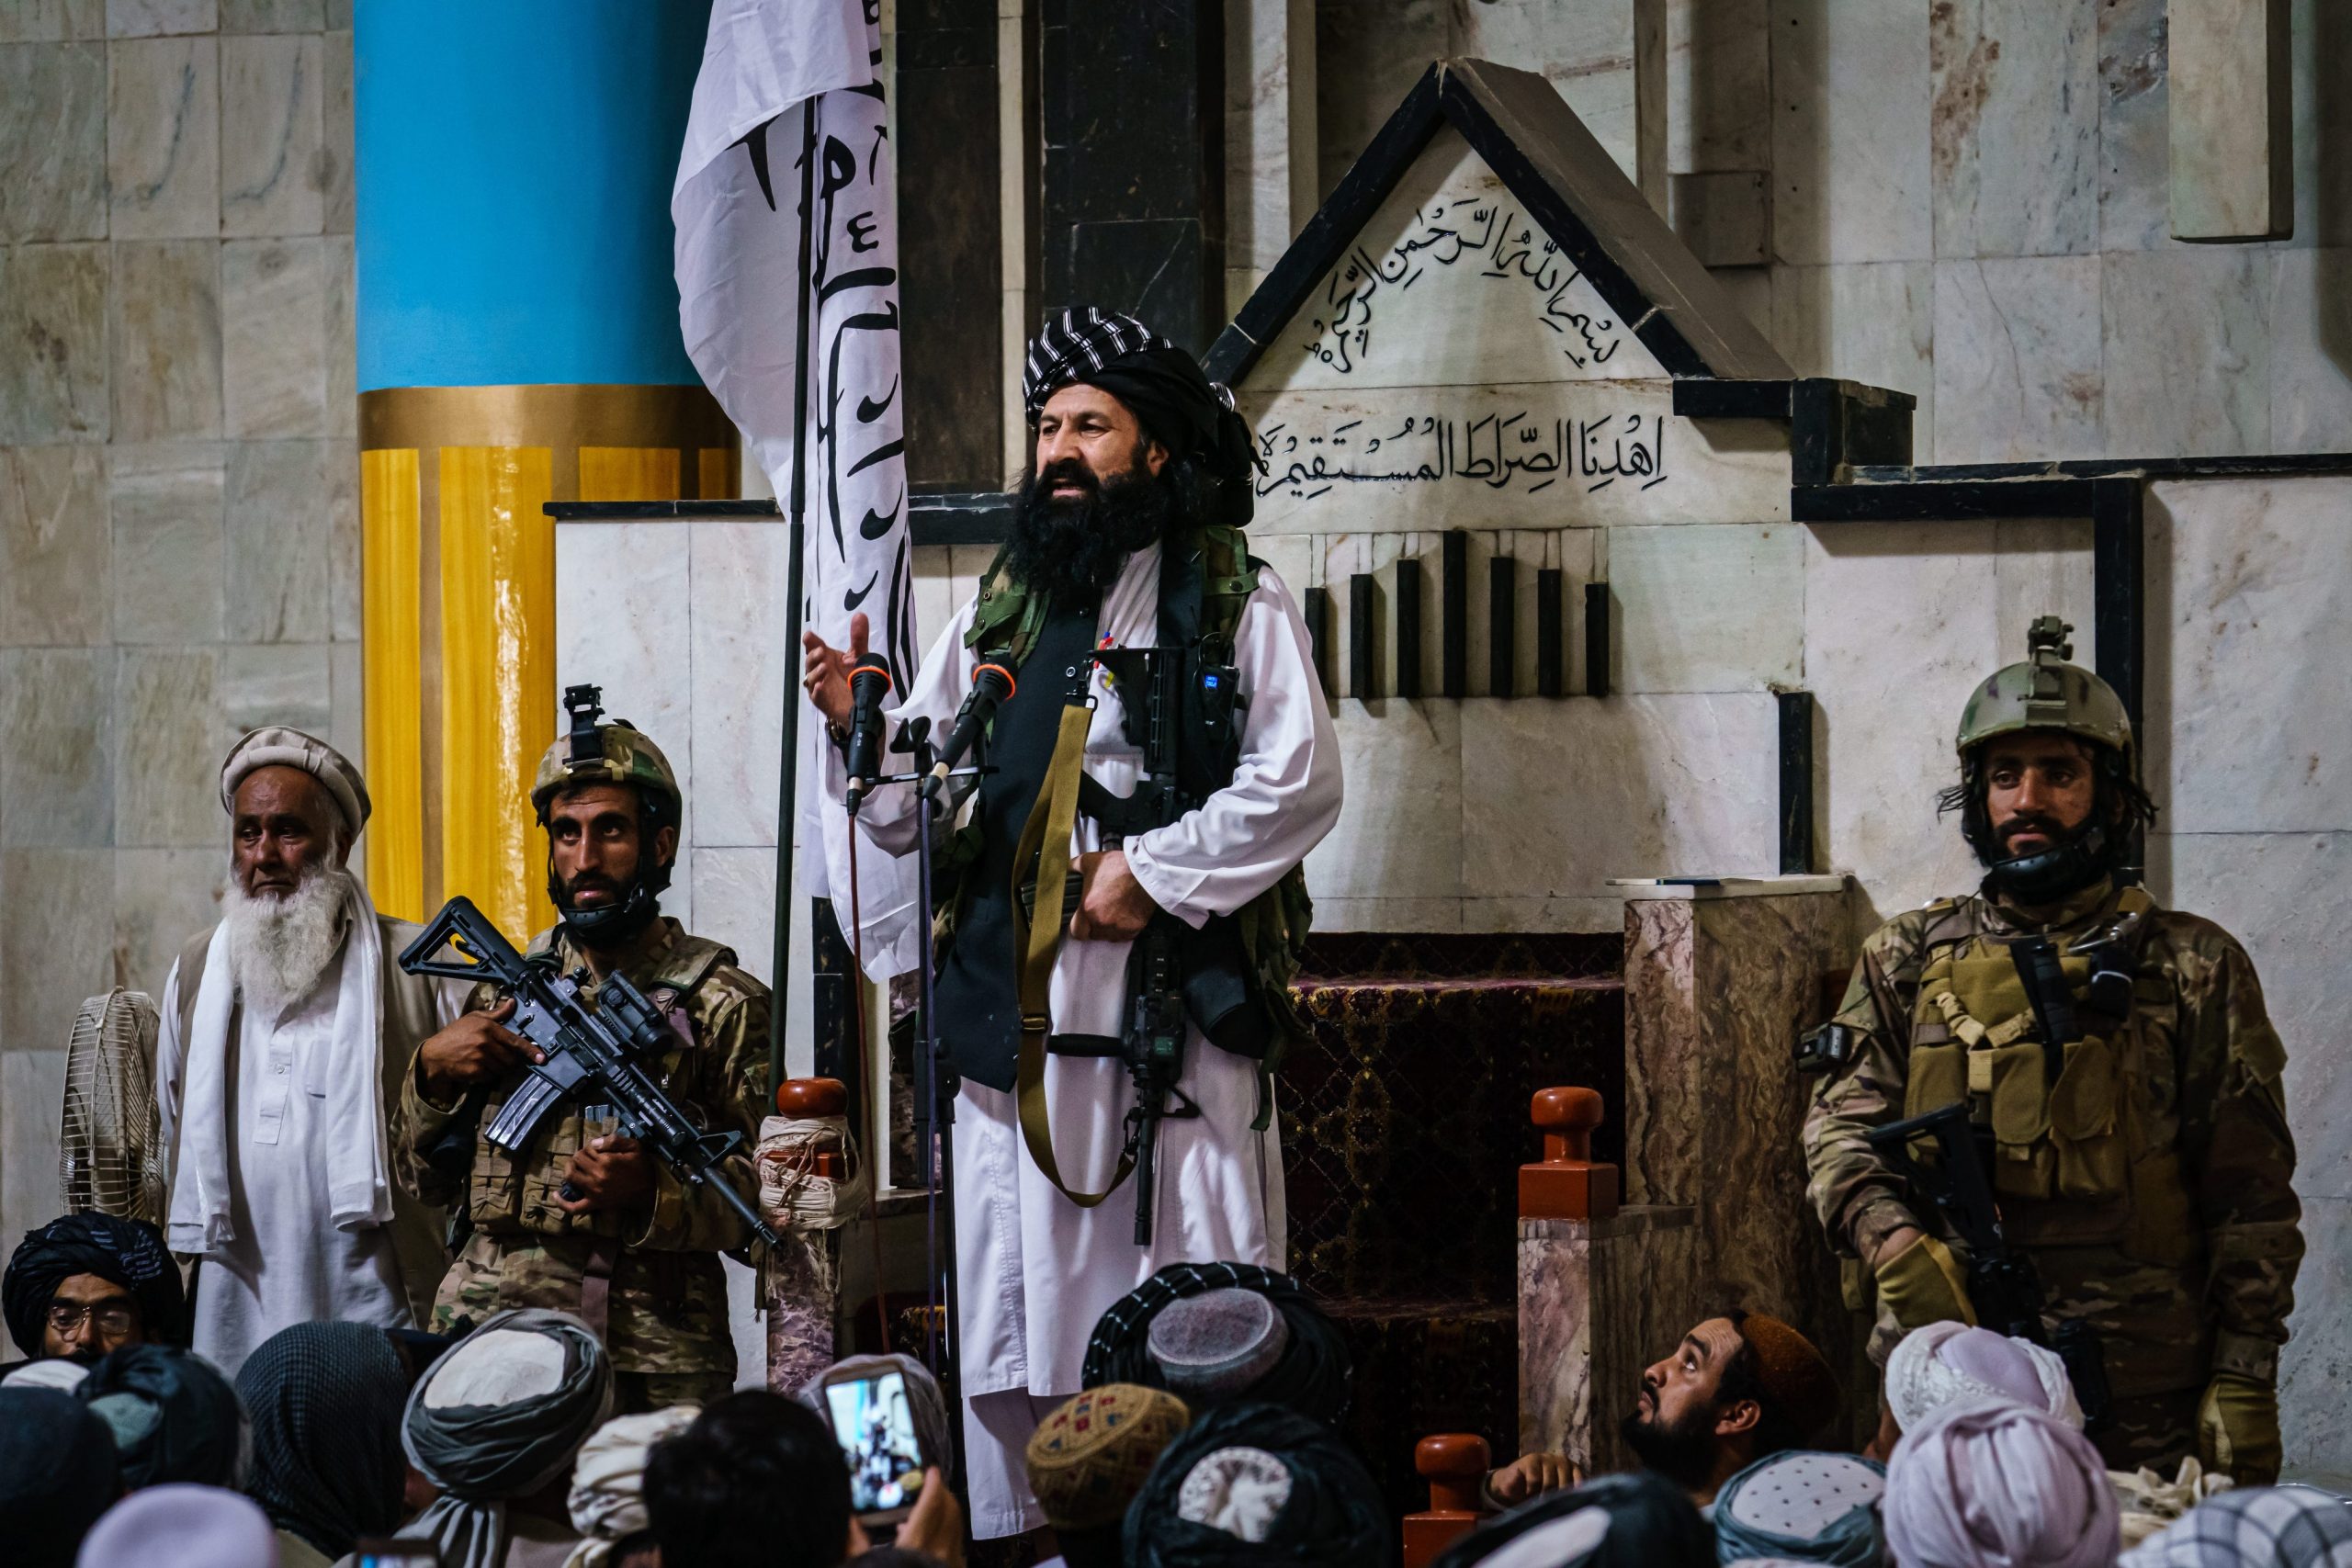 Khalil al-Rahman Haqqani, a leader of the Taliban affiliated Haqqani network, and a U.S.-designated terrorist with a five million dollar bounty, deliver his sermon to a large congregation at the Pul-I-Khishti Mosque in Kabul, Afghanistan, Friday, Aug. 20, 2021.